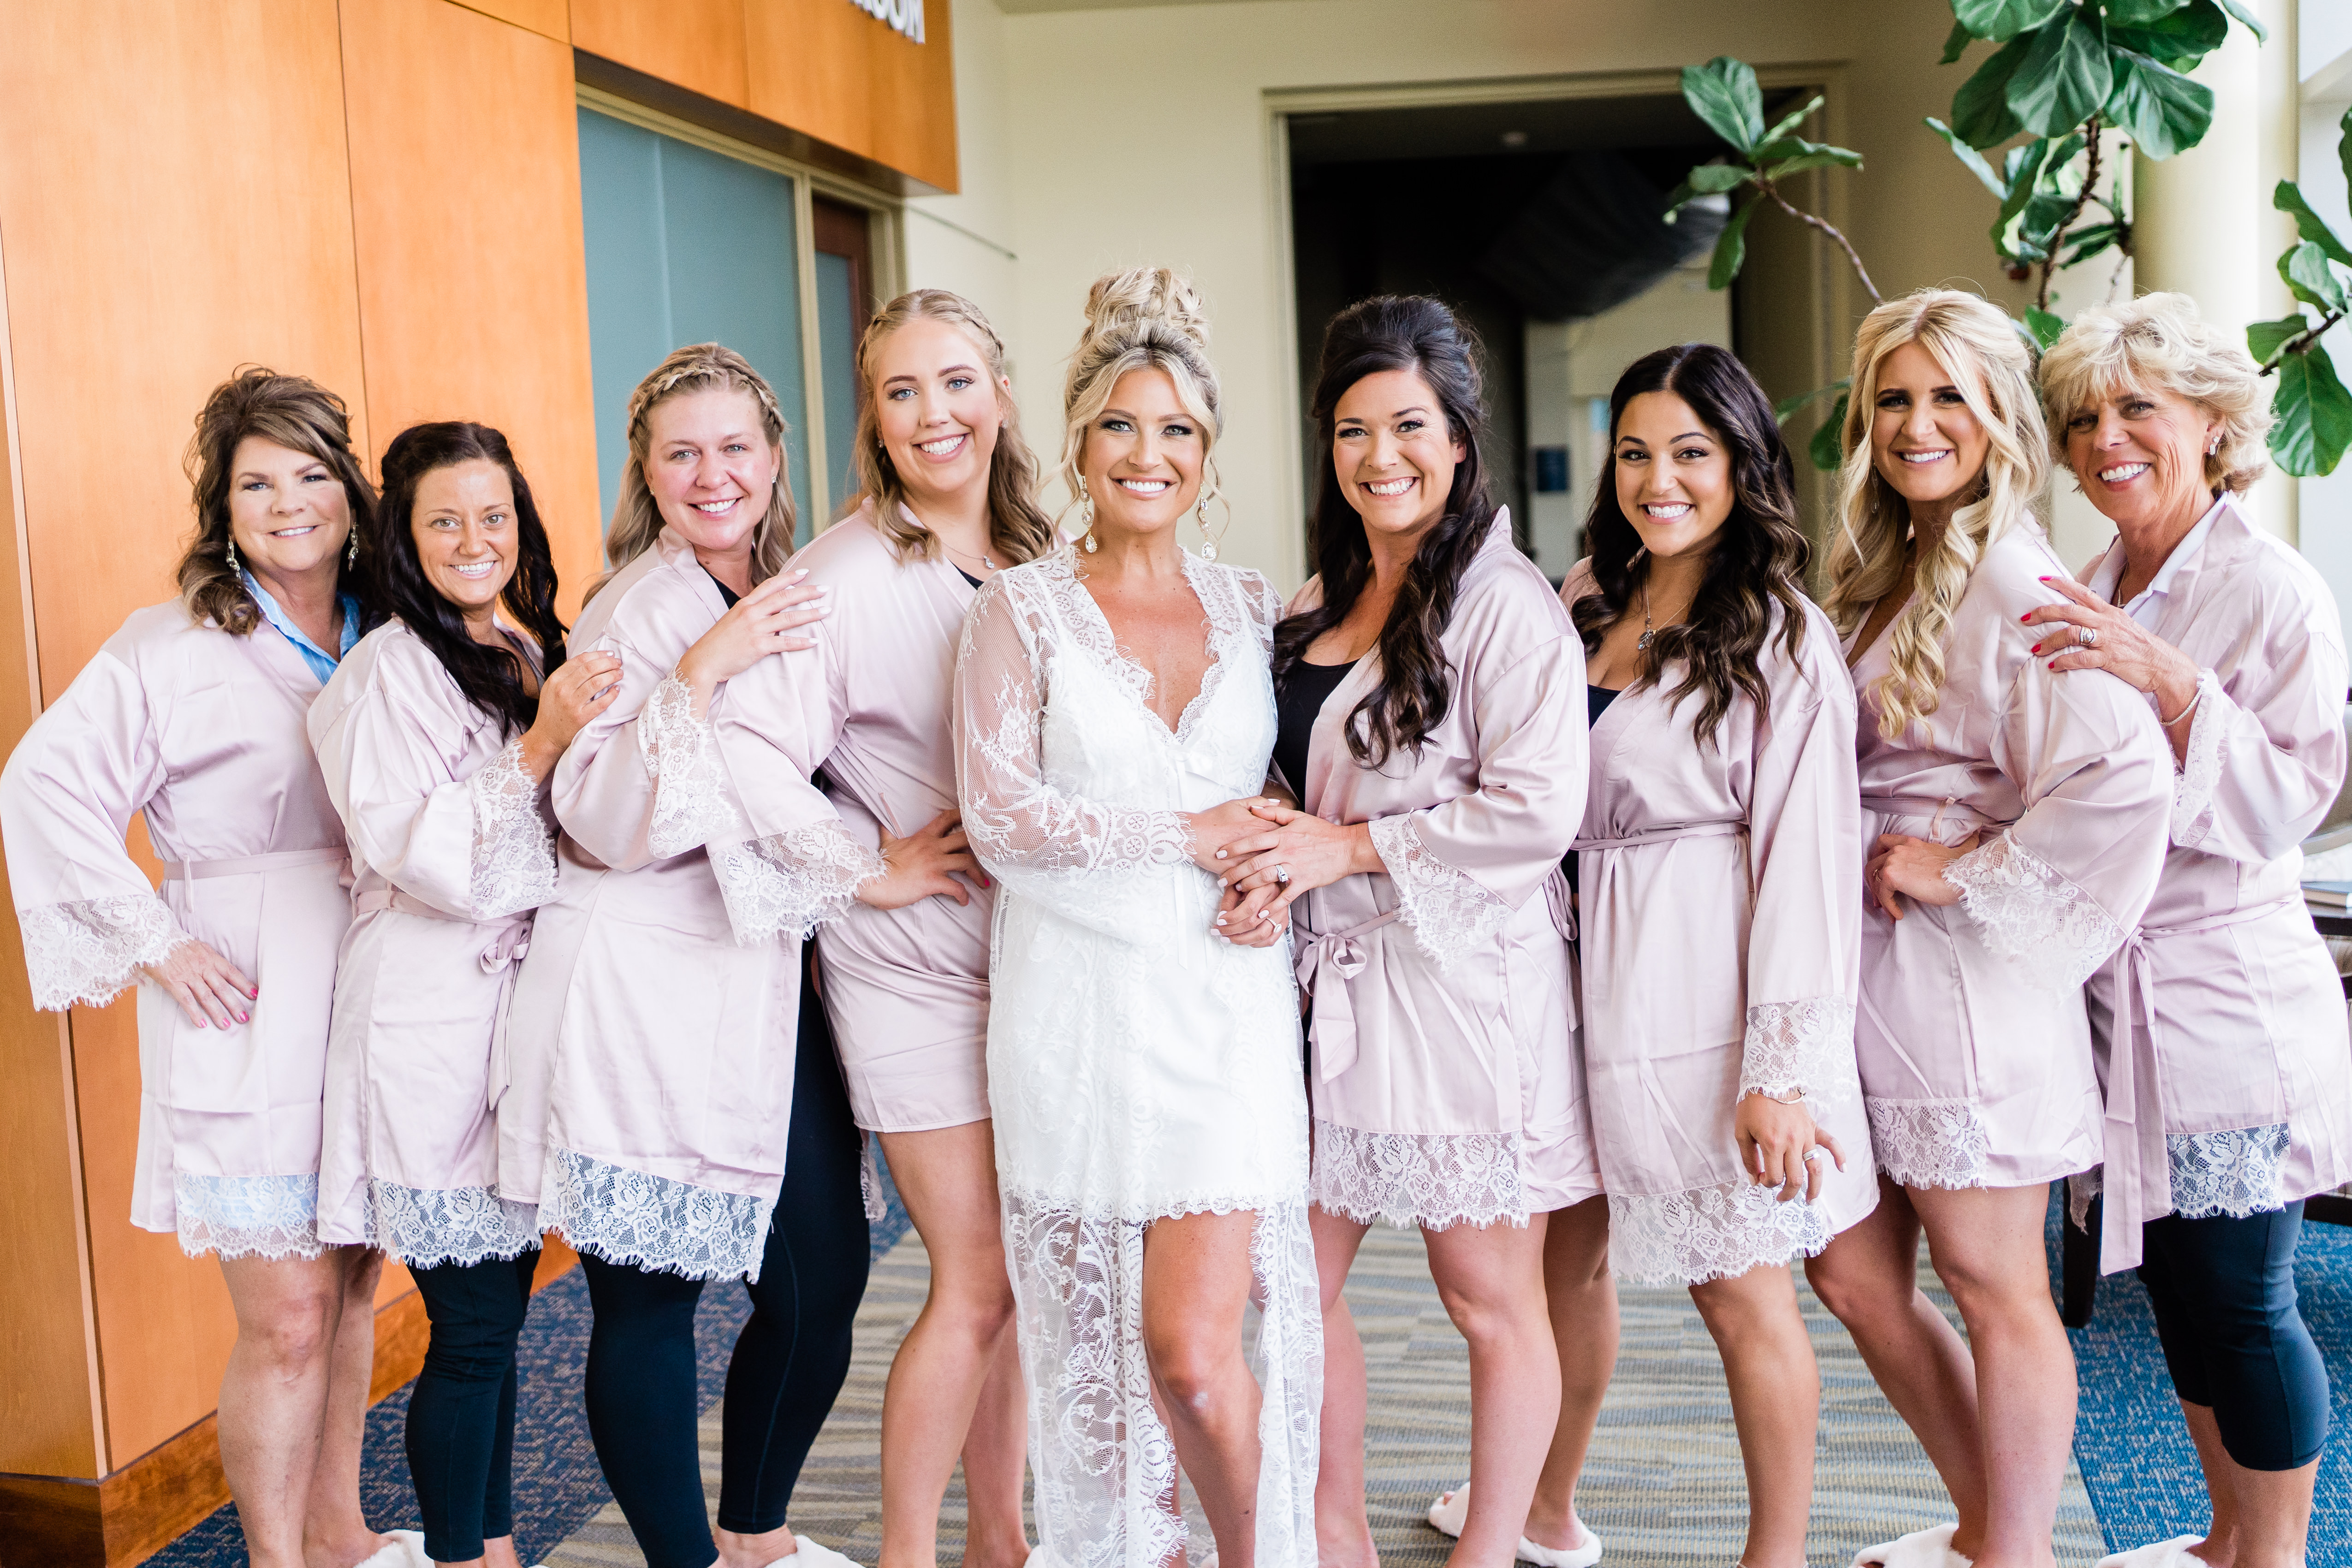 Indiana wedding photographer captures bride standing with bridesmaids wearing robes